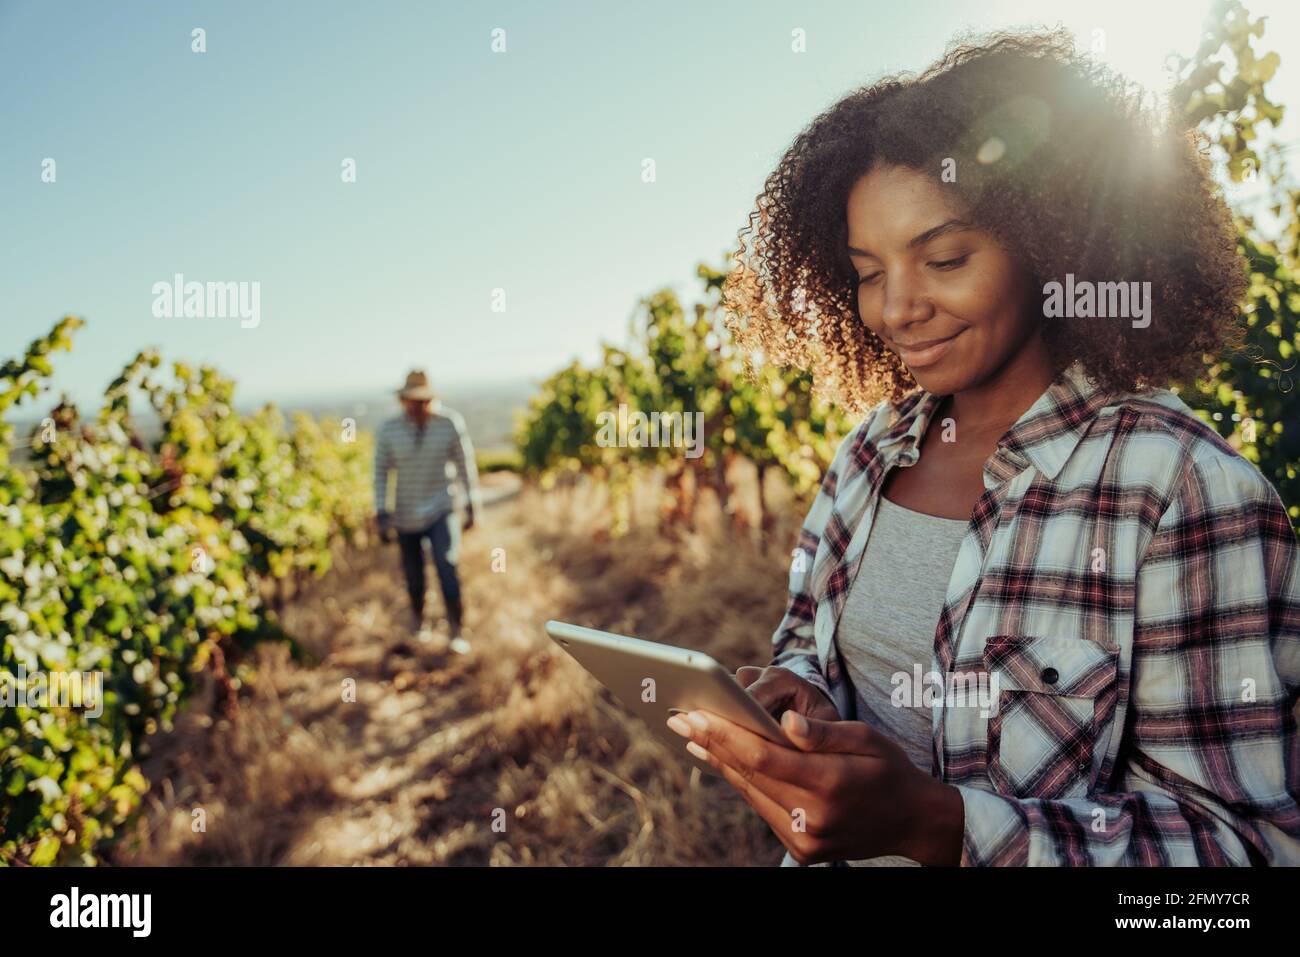 Mixed race female farmer smiling working in vineyards researching about vines on digital tablet with he help of male colleague Stock Photo